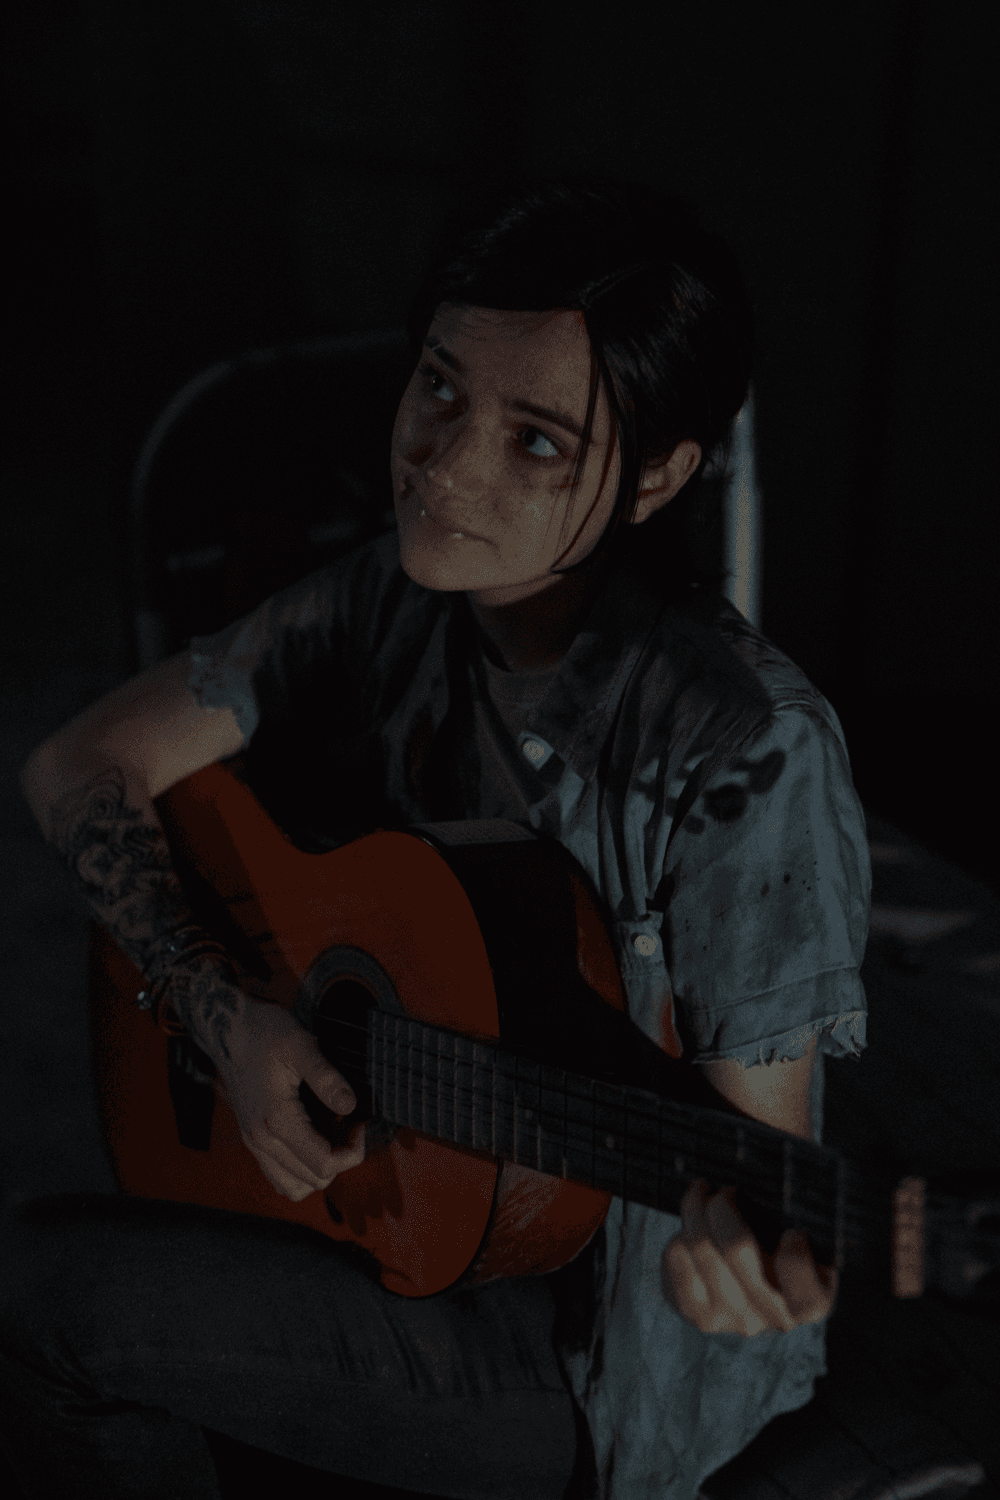 Ellie Williams - The Last of Us Part 2 Cosplay (new photos by me